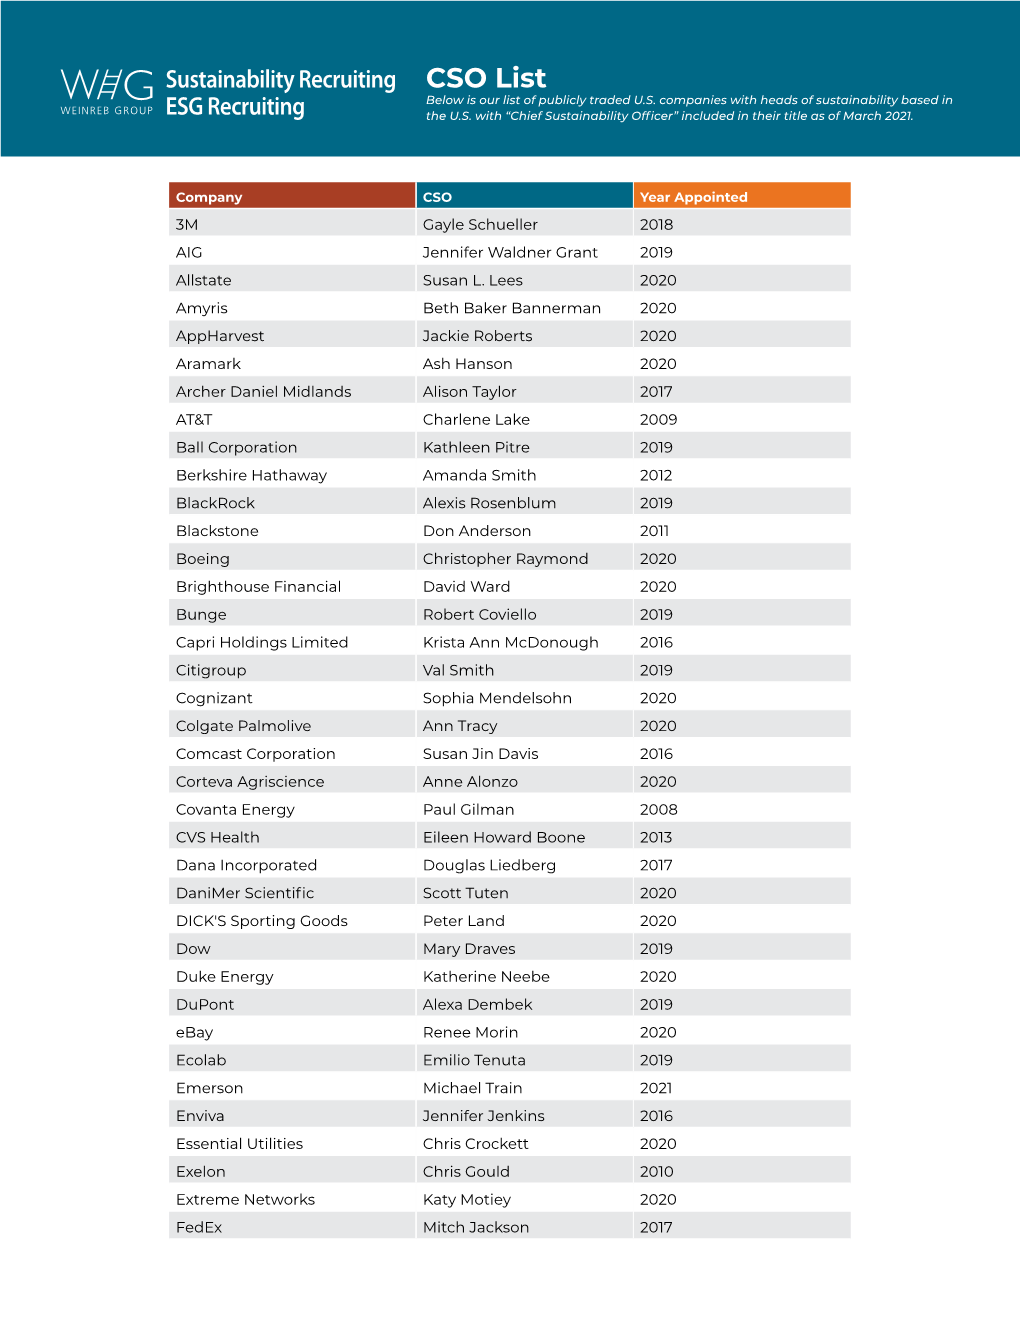 CSO List Below Is Our List of Publicly Traded U.S